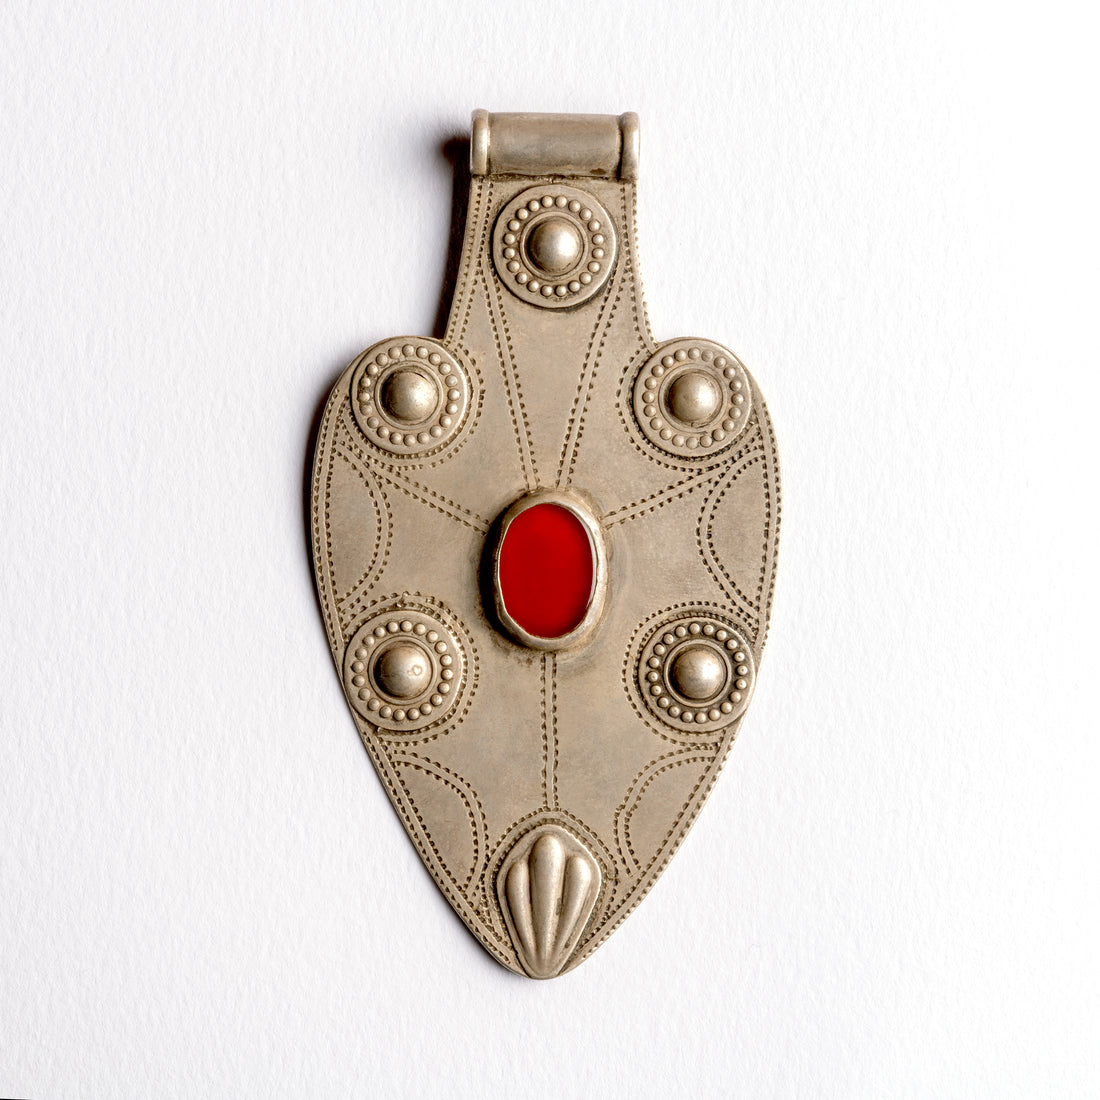 Antique Silver Amulet With Carnelian